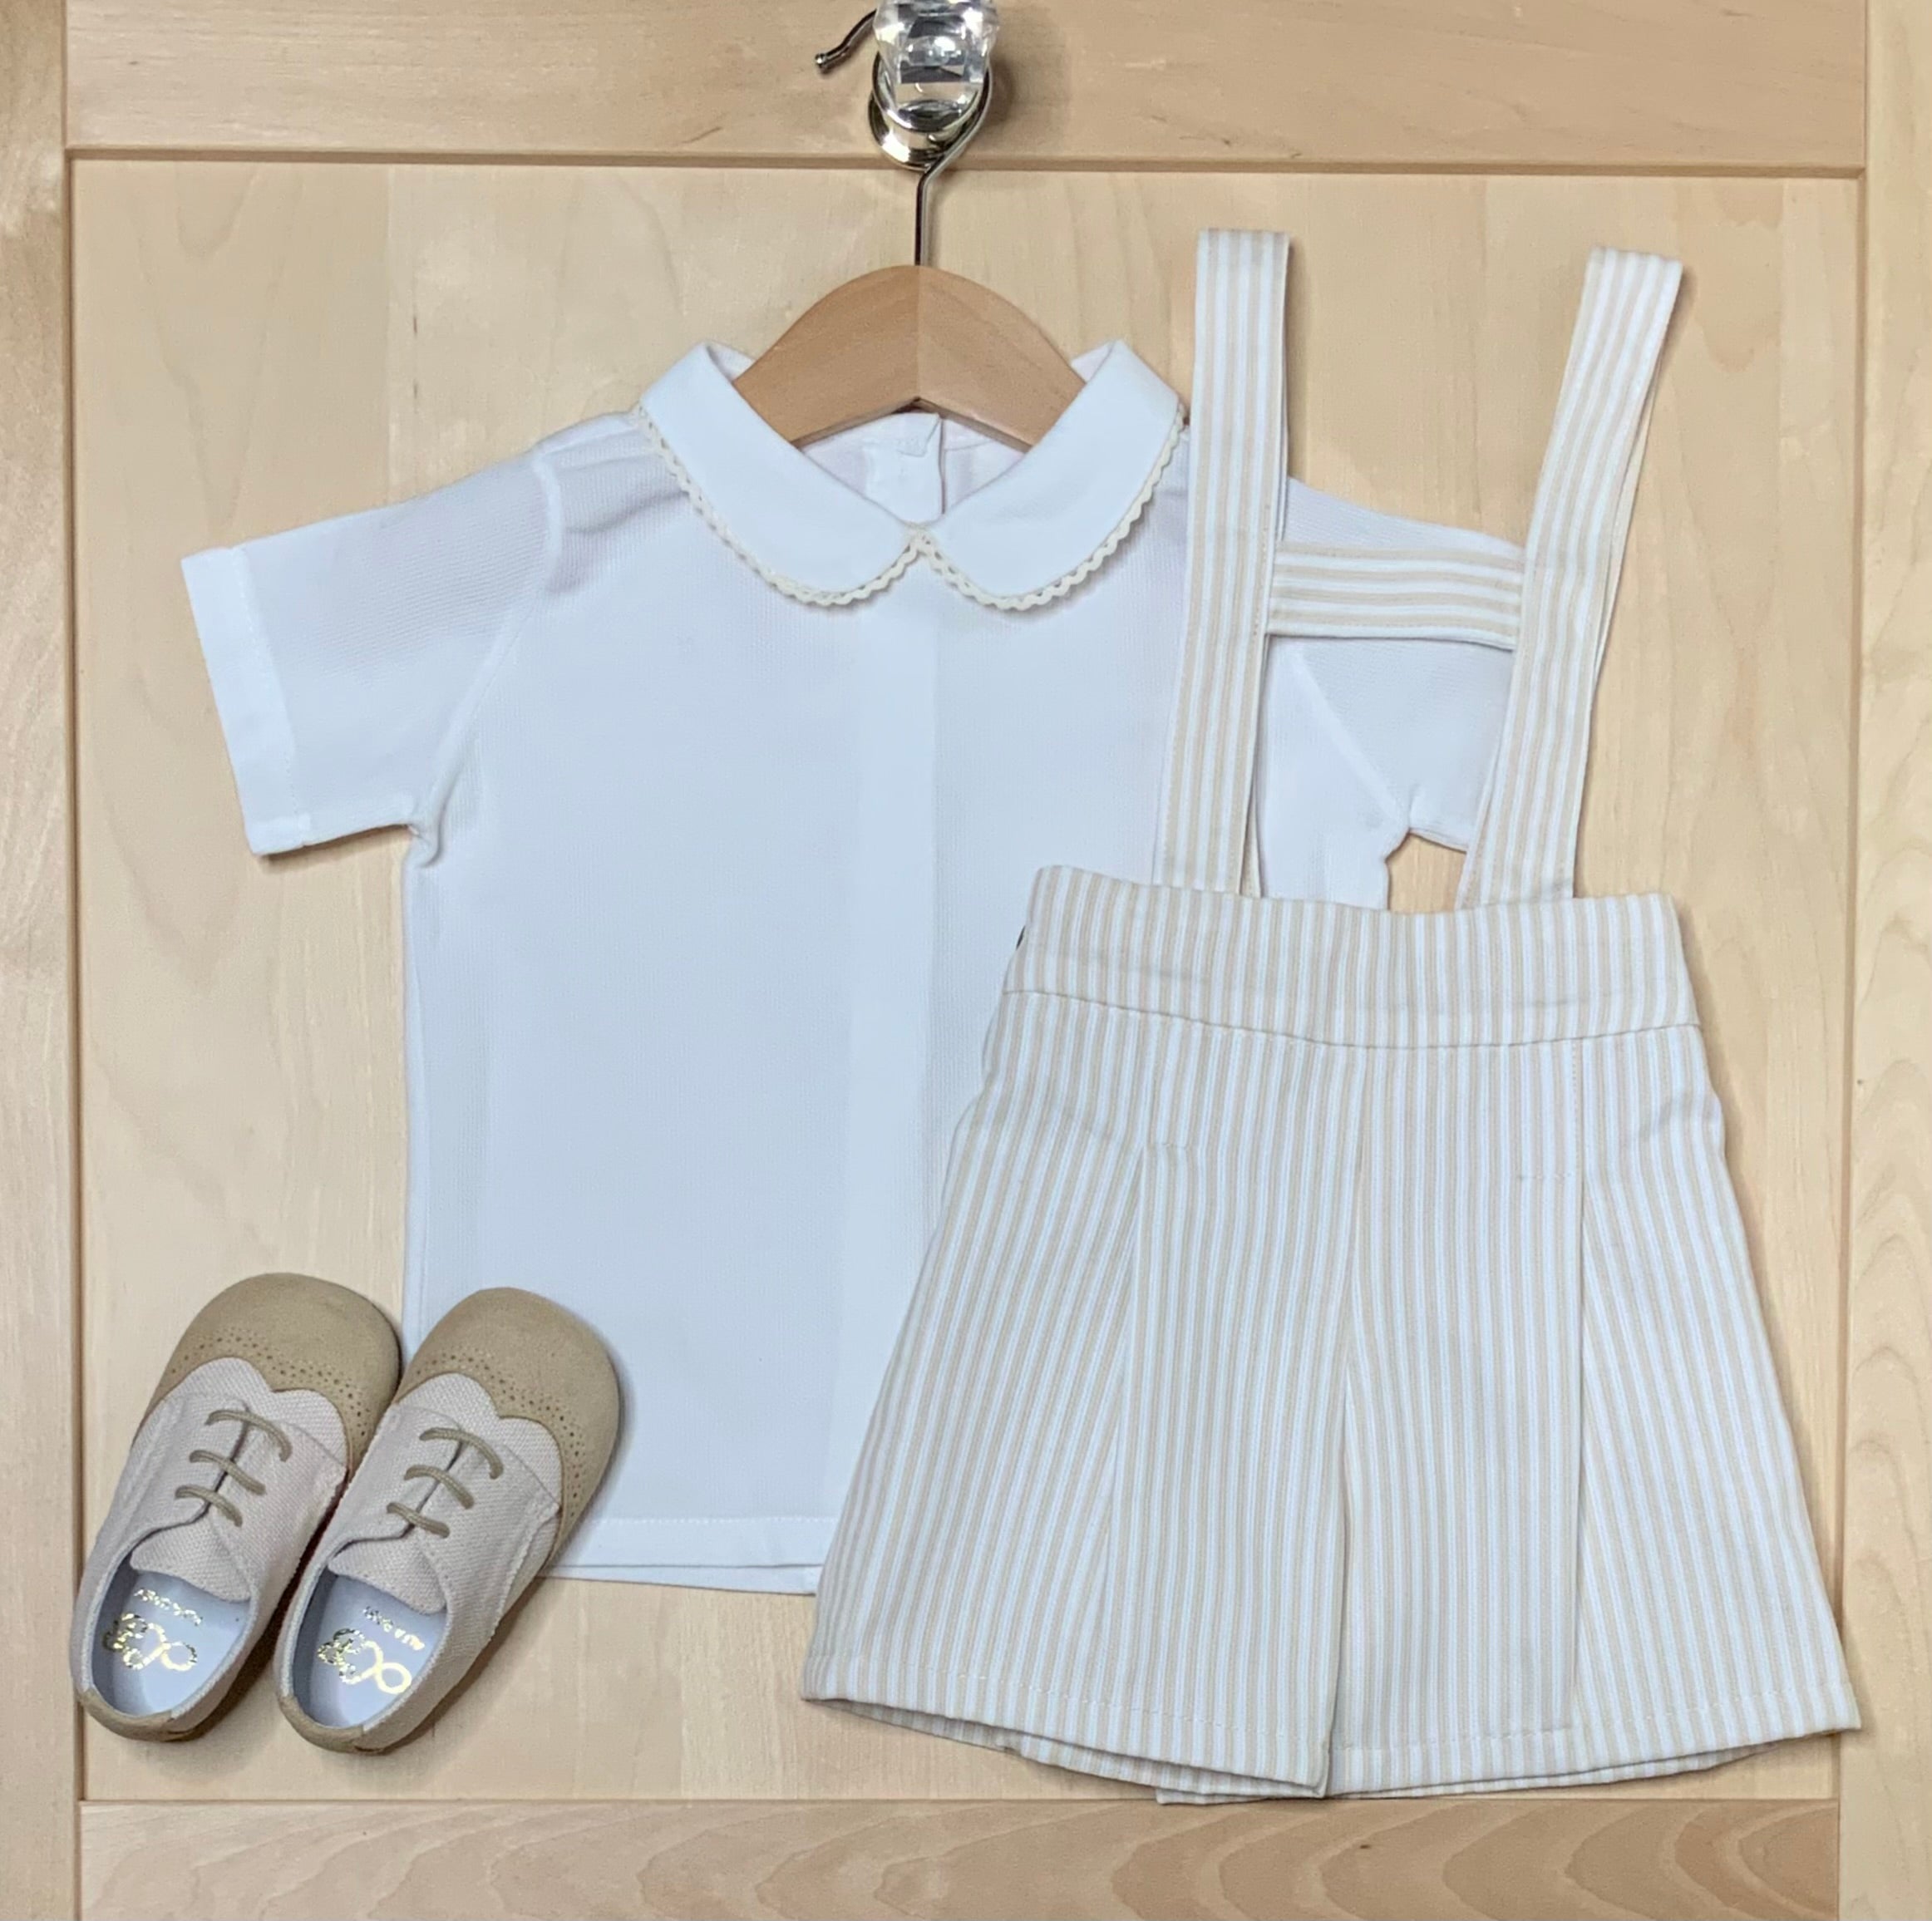 Ivory-Vanilla Baby Boy, Toddler Suspender Shorts and  White Shirt-Shoes Complete the Look